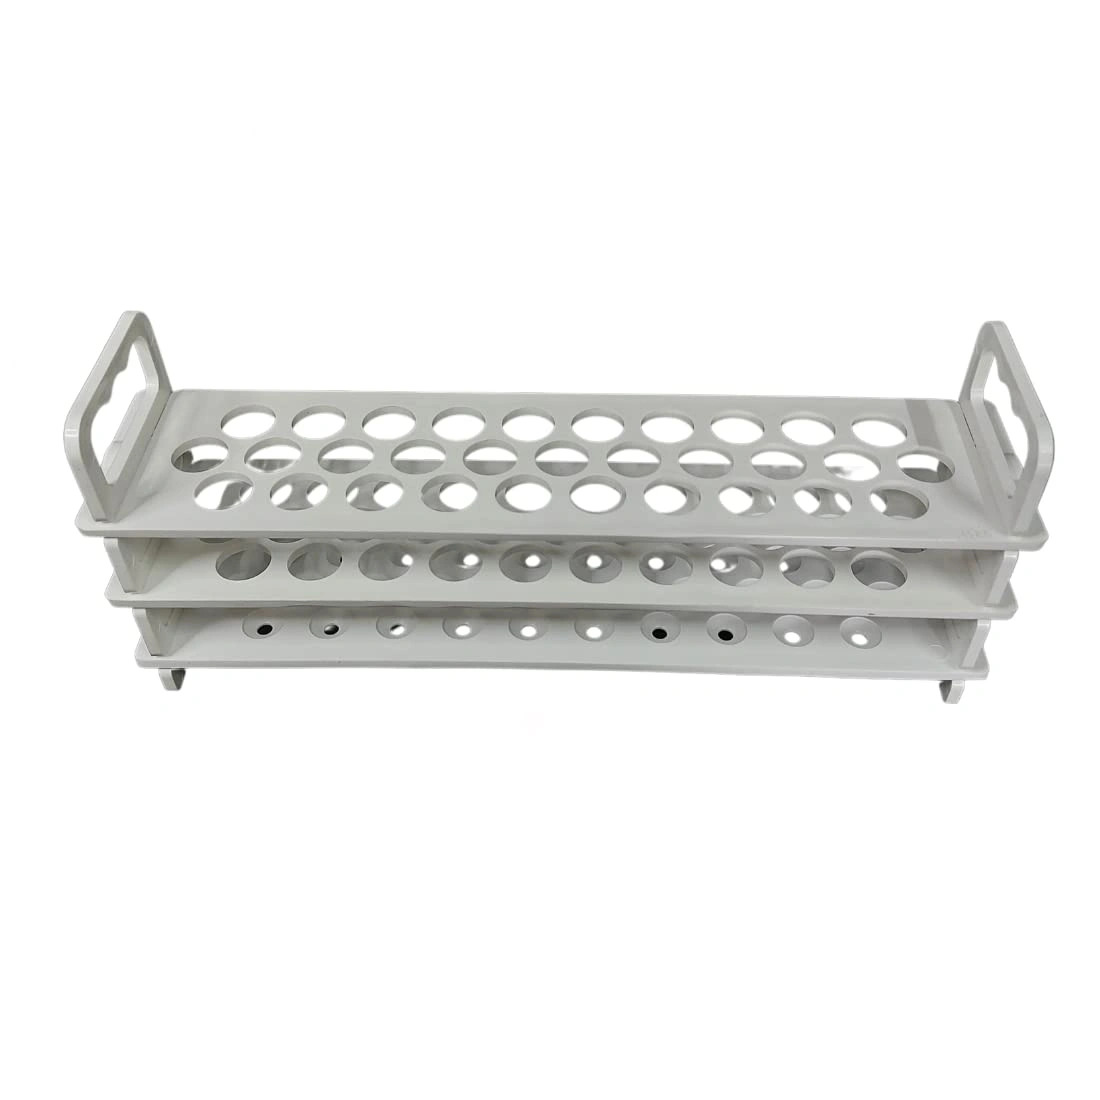 Test tube stand 3 TIER: 16mm × 31 Holes (Pack of 1)-1